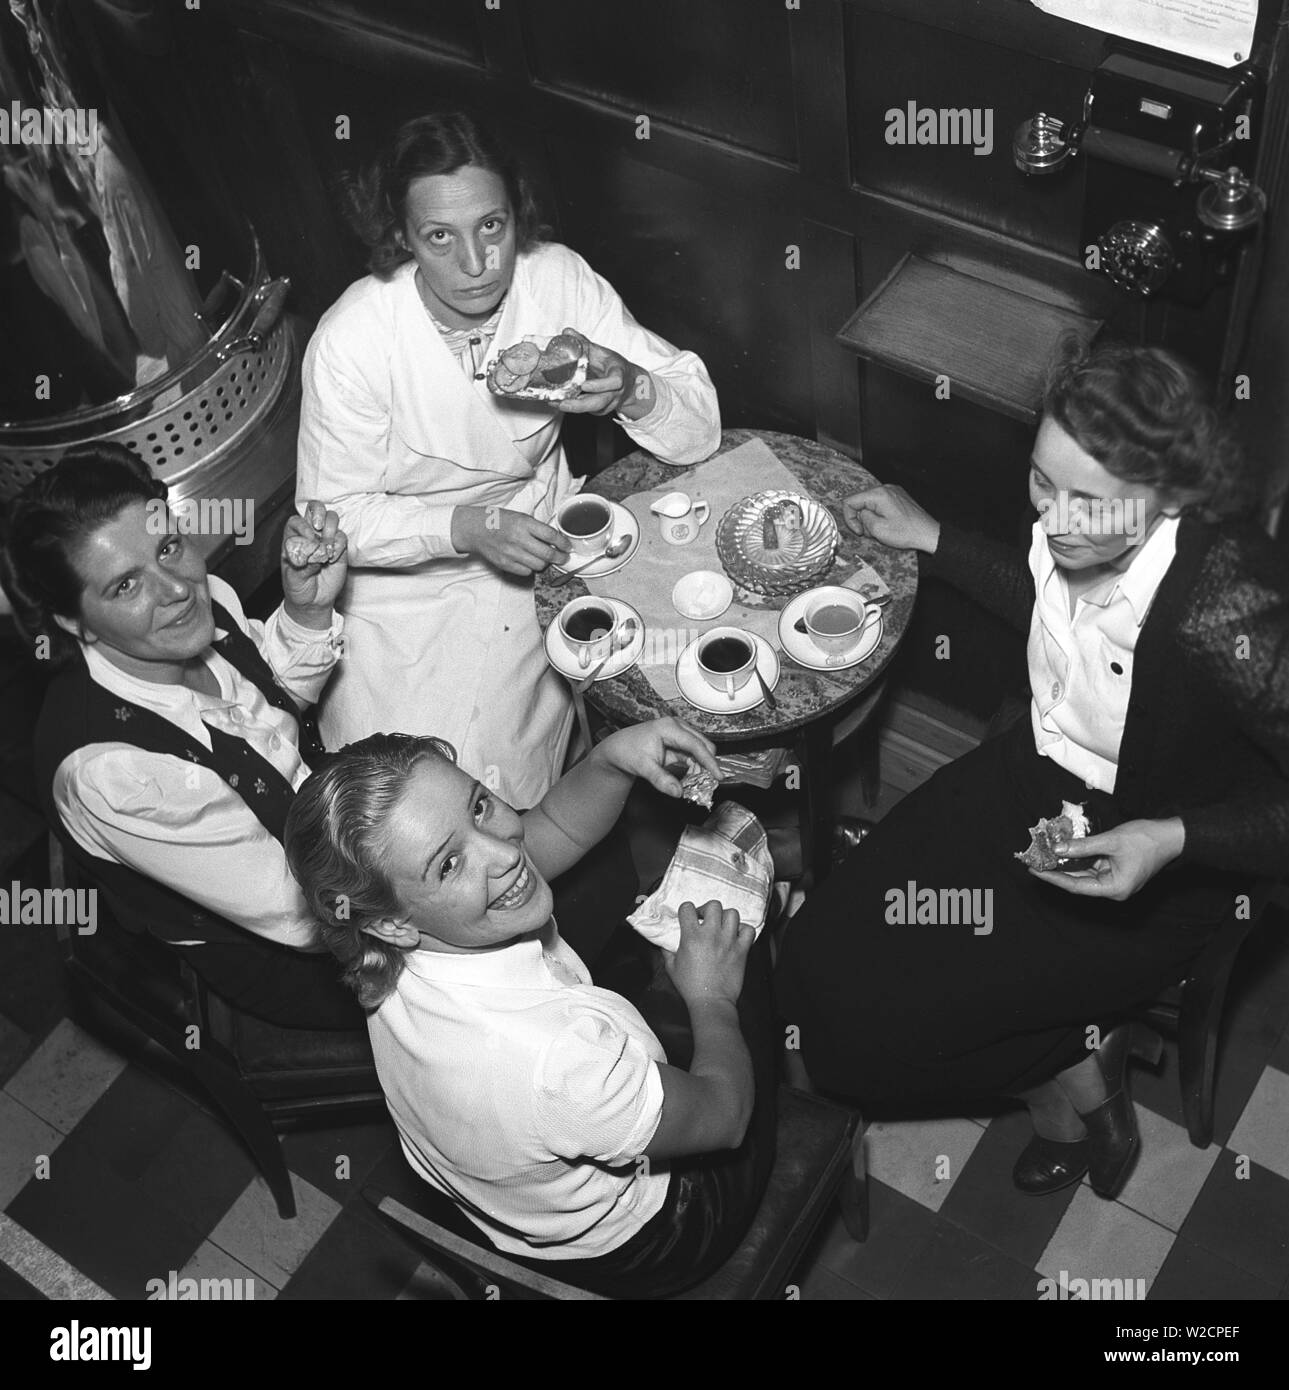 1940s Fika . Four young woman working at the cafe Röda rummet in Stockholm are sitting together and having a cup of coffee and tea.  Sweden. Photo Kristoffersson Ref 215-2. Sweden 1941 Stock Photo